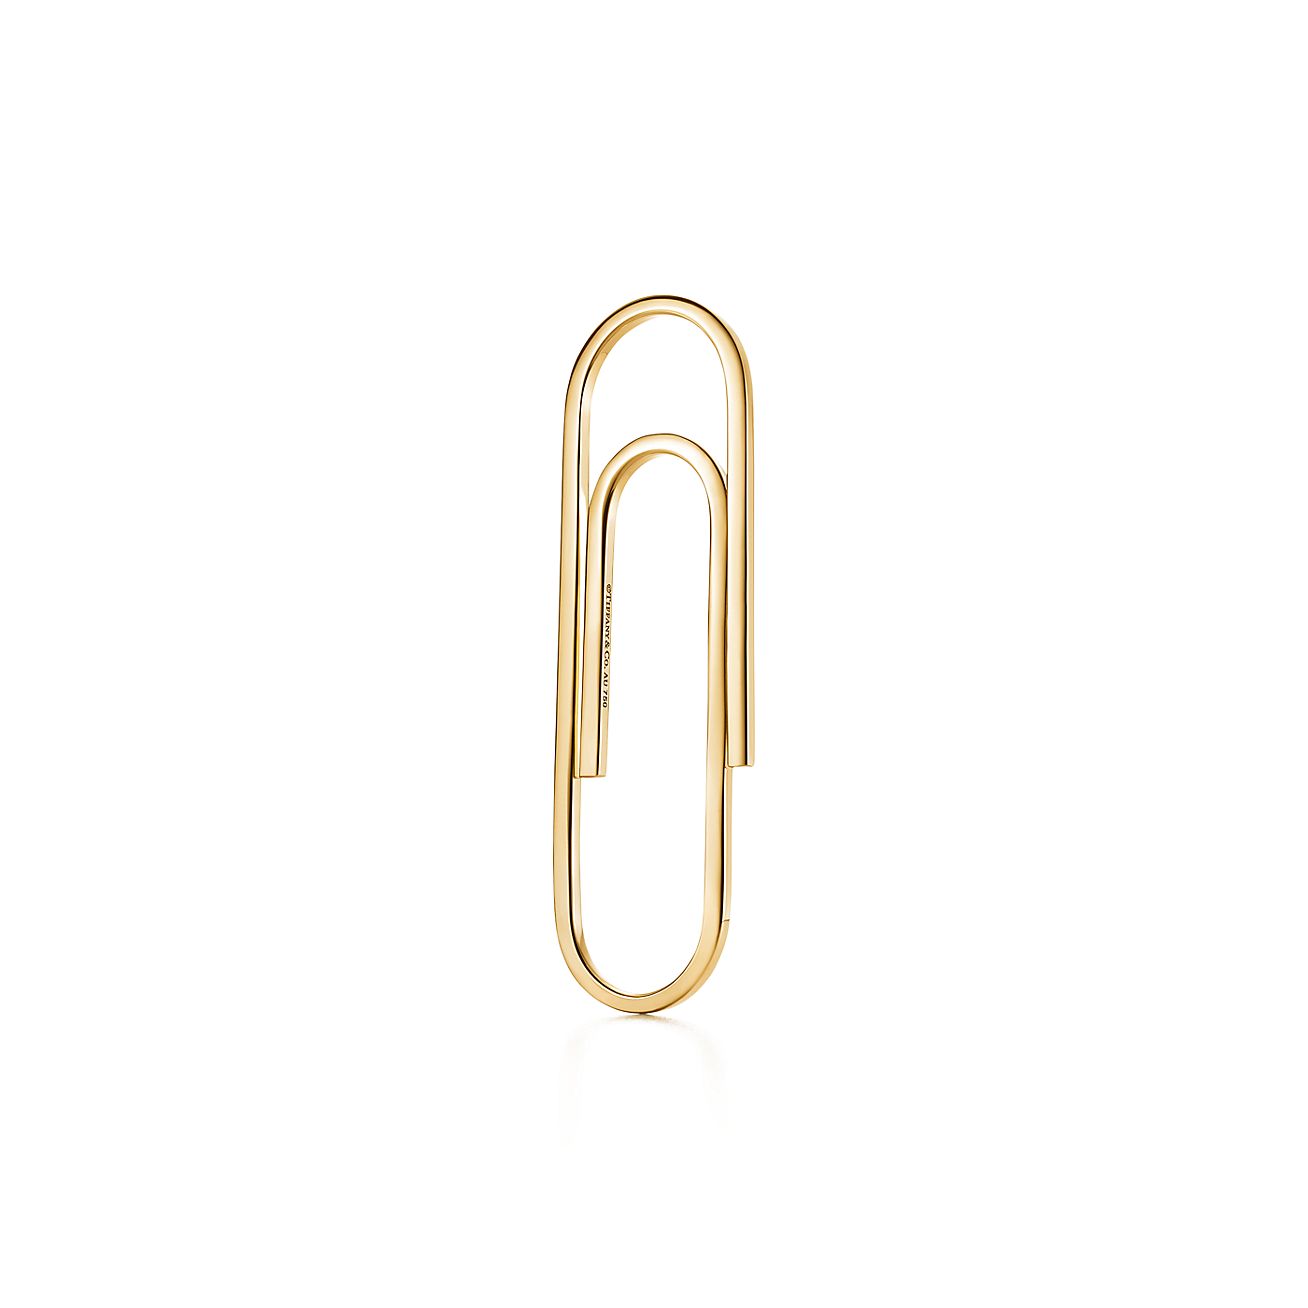 paper clip tiffany and co